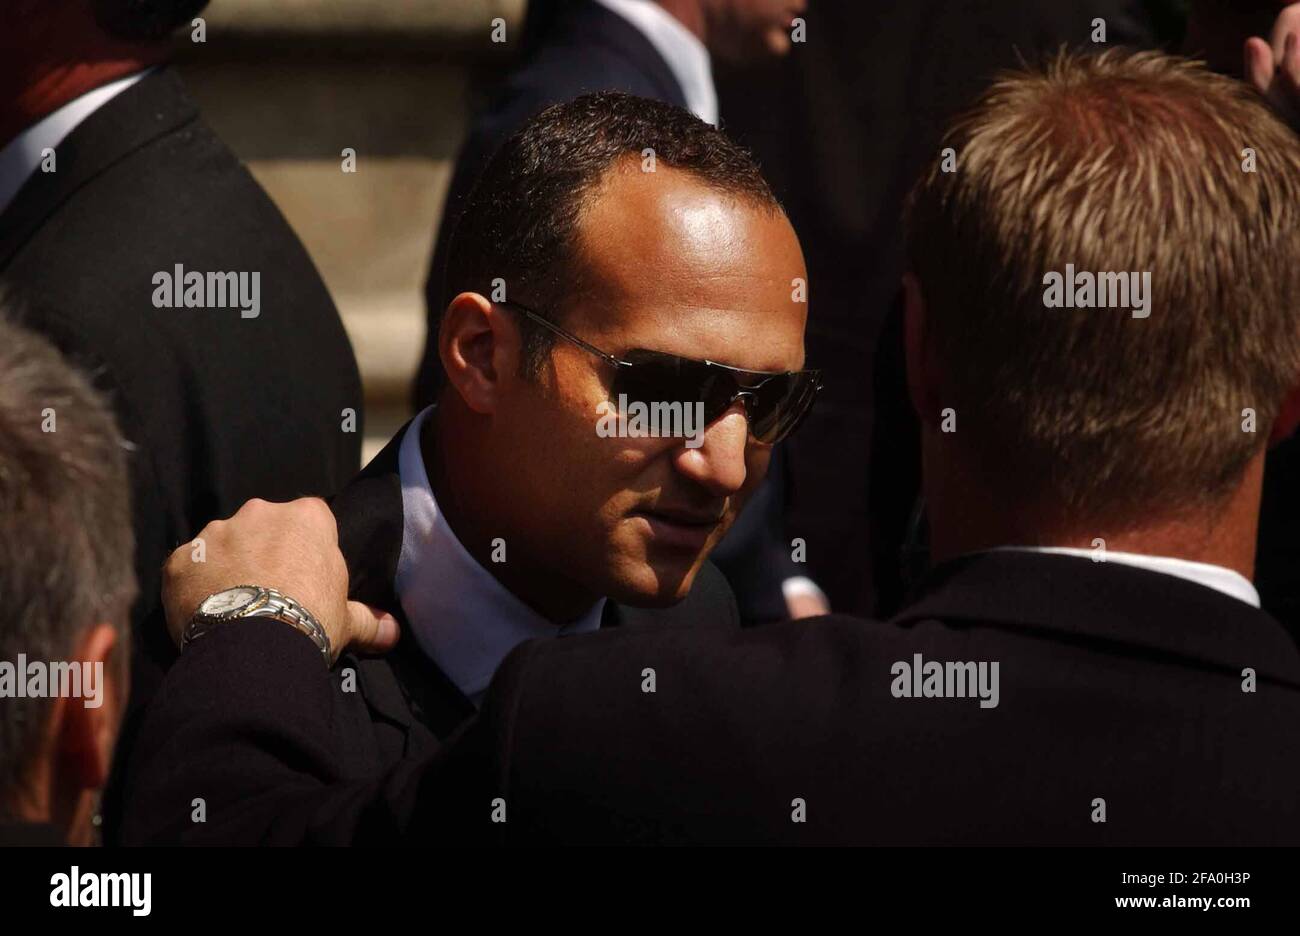 MARK BUTCHER  AFTER THE MEMORIAL SERVICE FOR THE CRICKETERS SURREY TEAMMATE  BEN  HOLLIOAK AT WHICH THE ENGLAND PLAYER SANG A SONG IN SOUTHWARK CATHEDRAL. 15/7/02 PILSTON Stock Photo